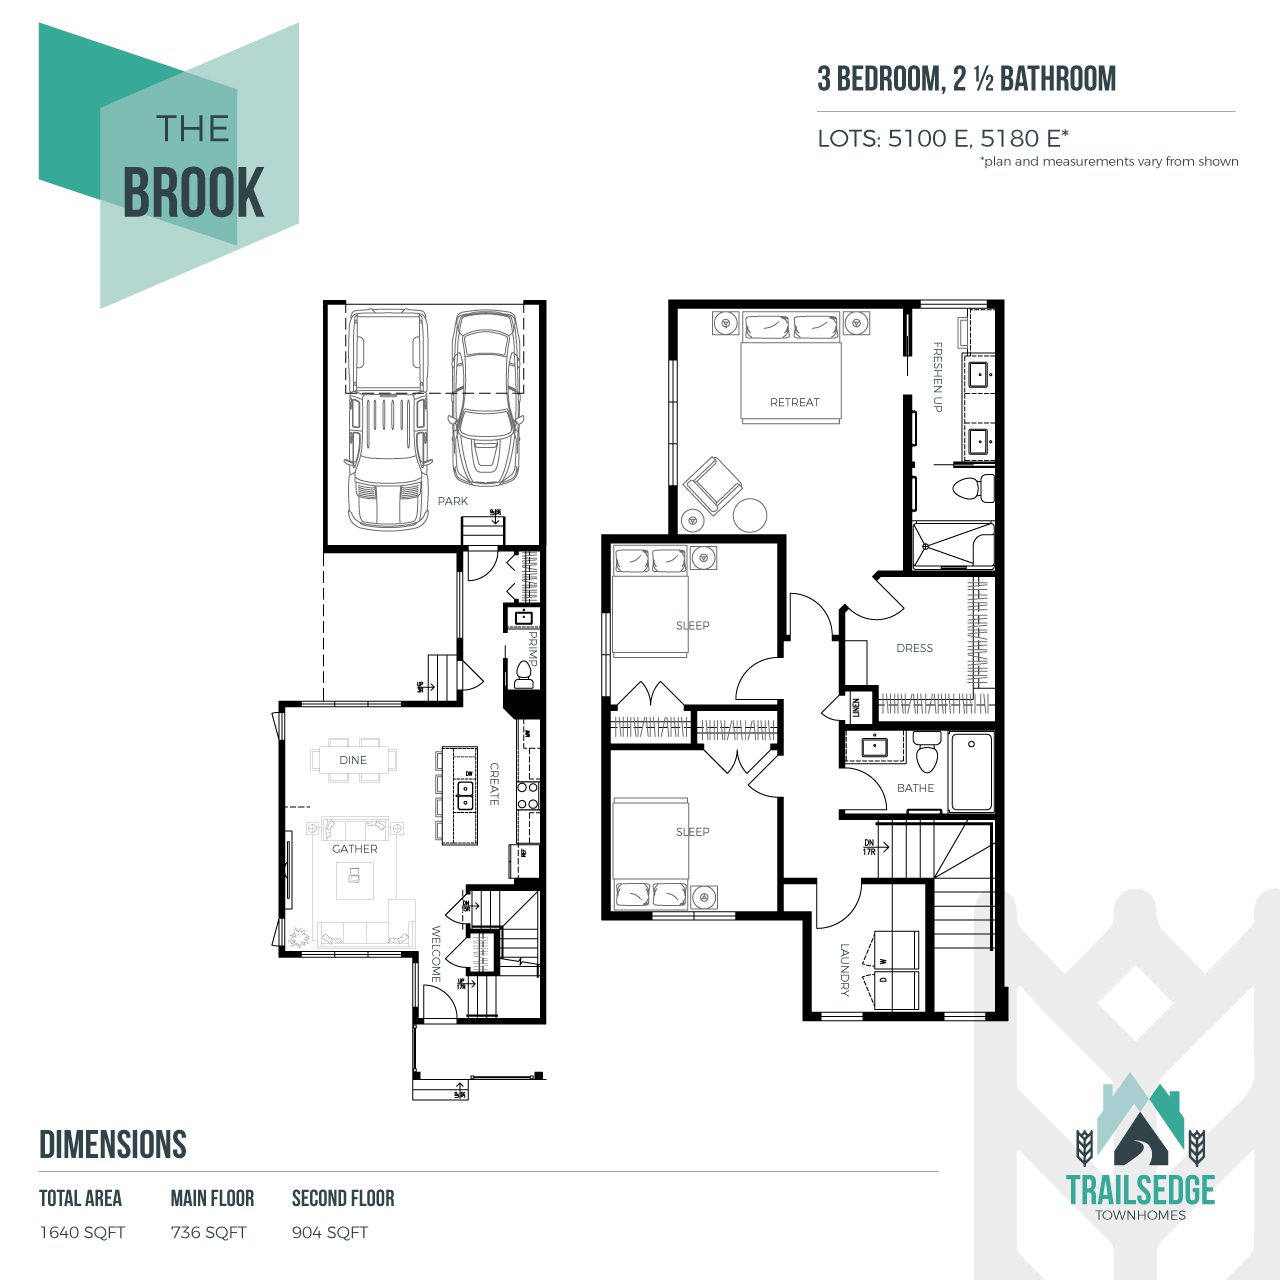 The brook floor plan with two bedrooms and two bathrooms.